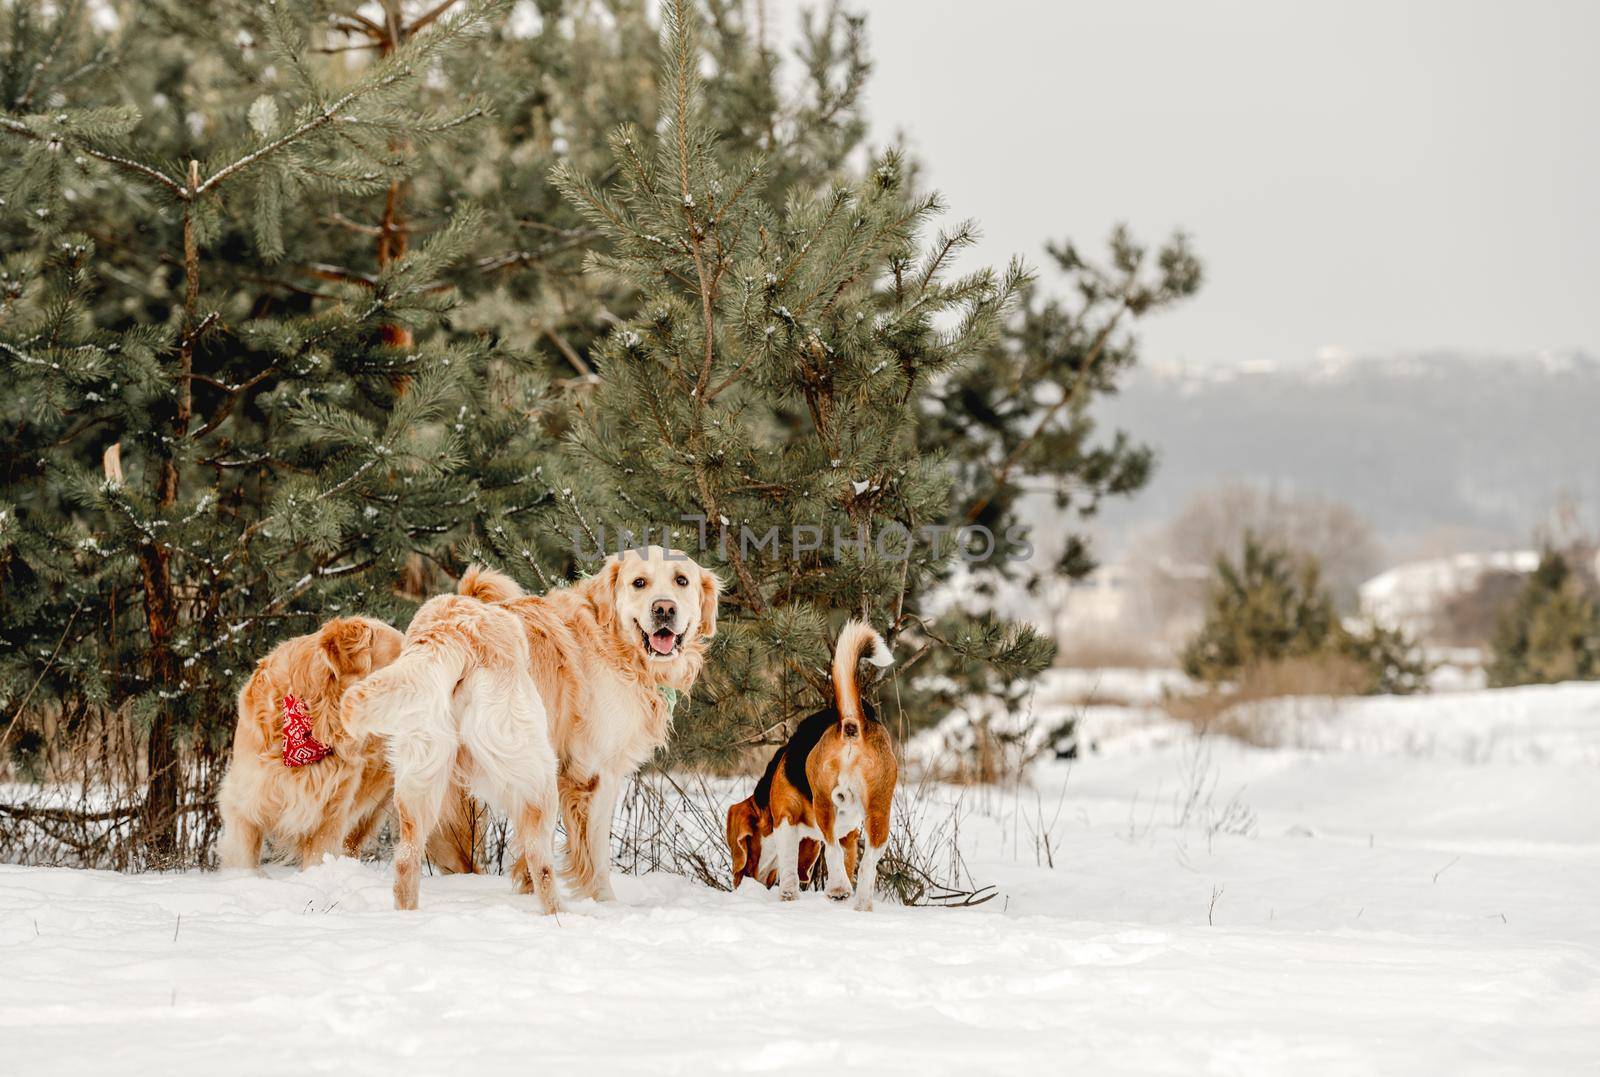 Golden retriever dog and beagle in winter time by tan4ikk1